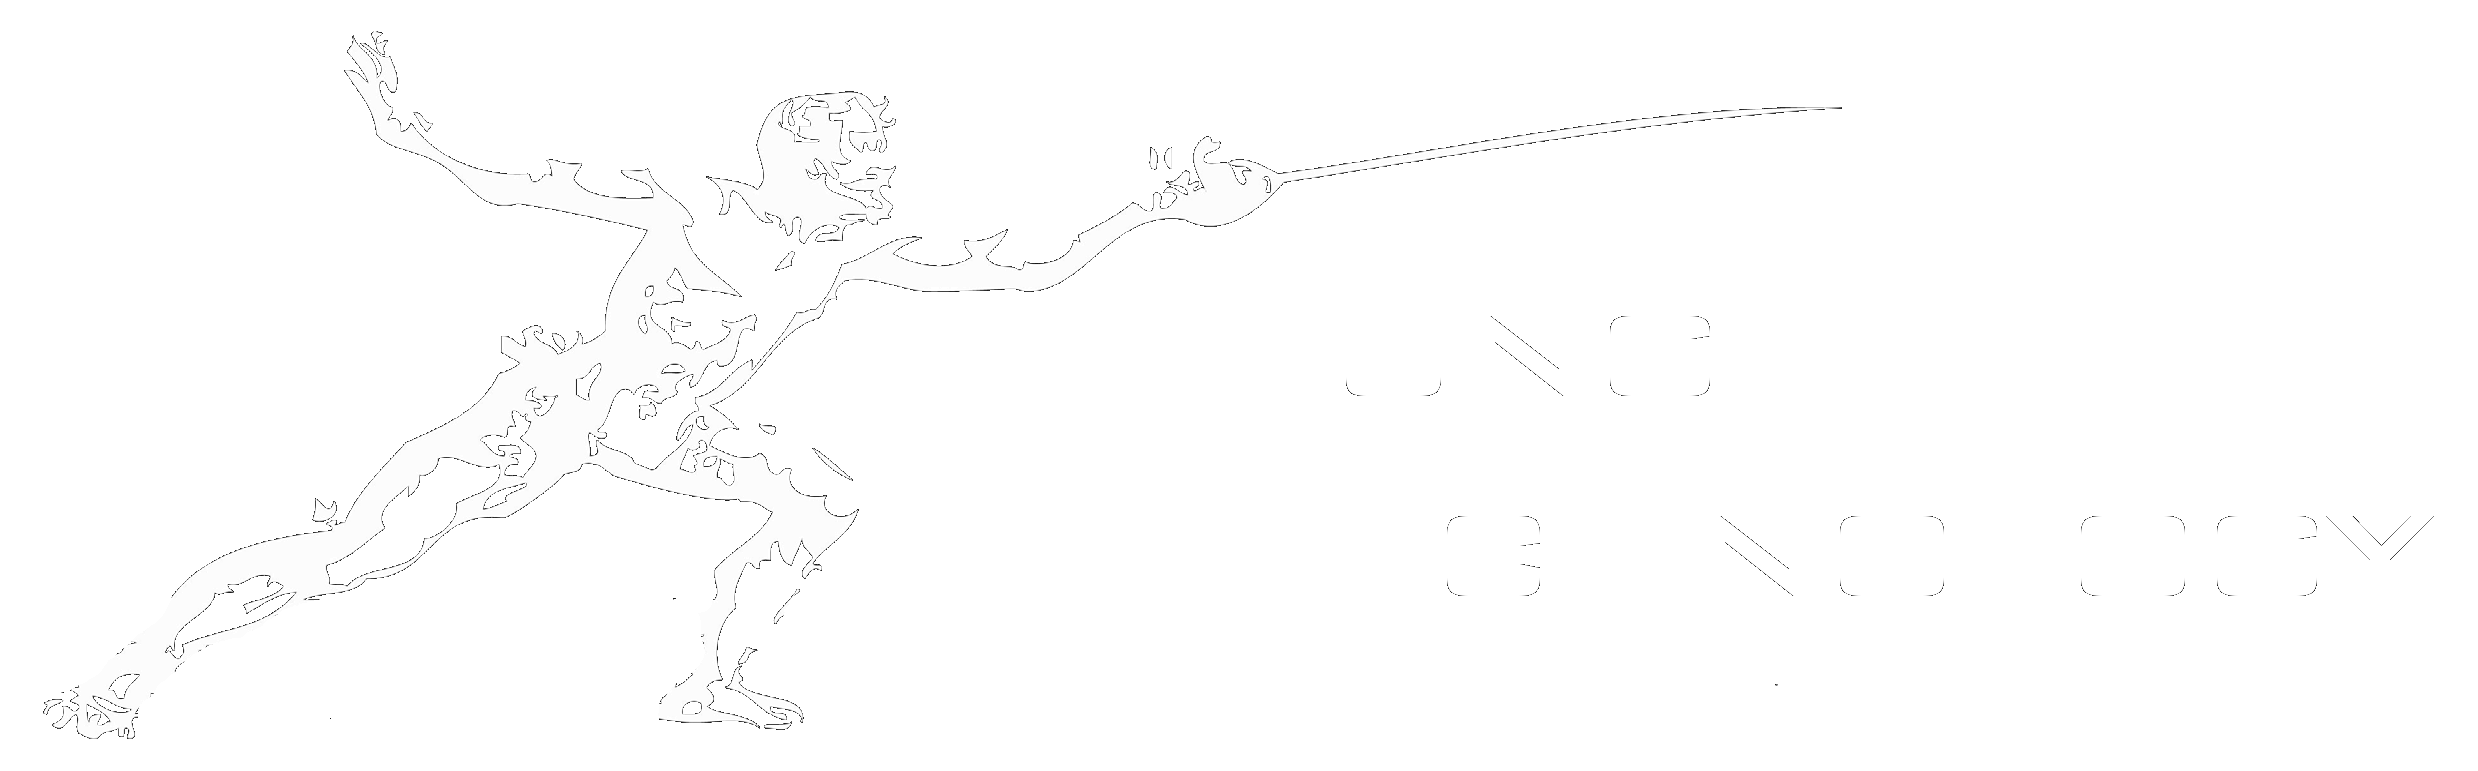 Lunge Technology